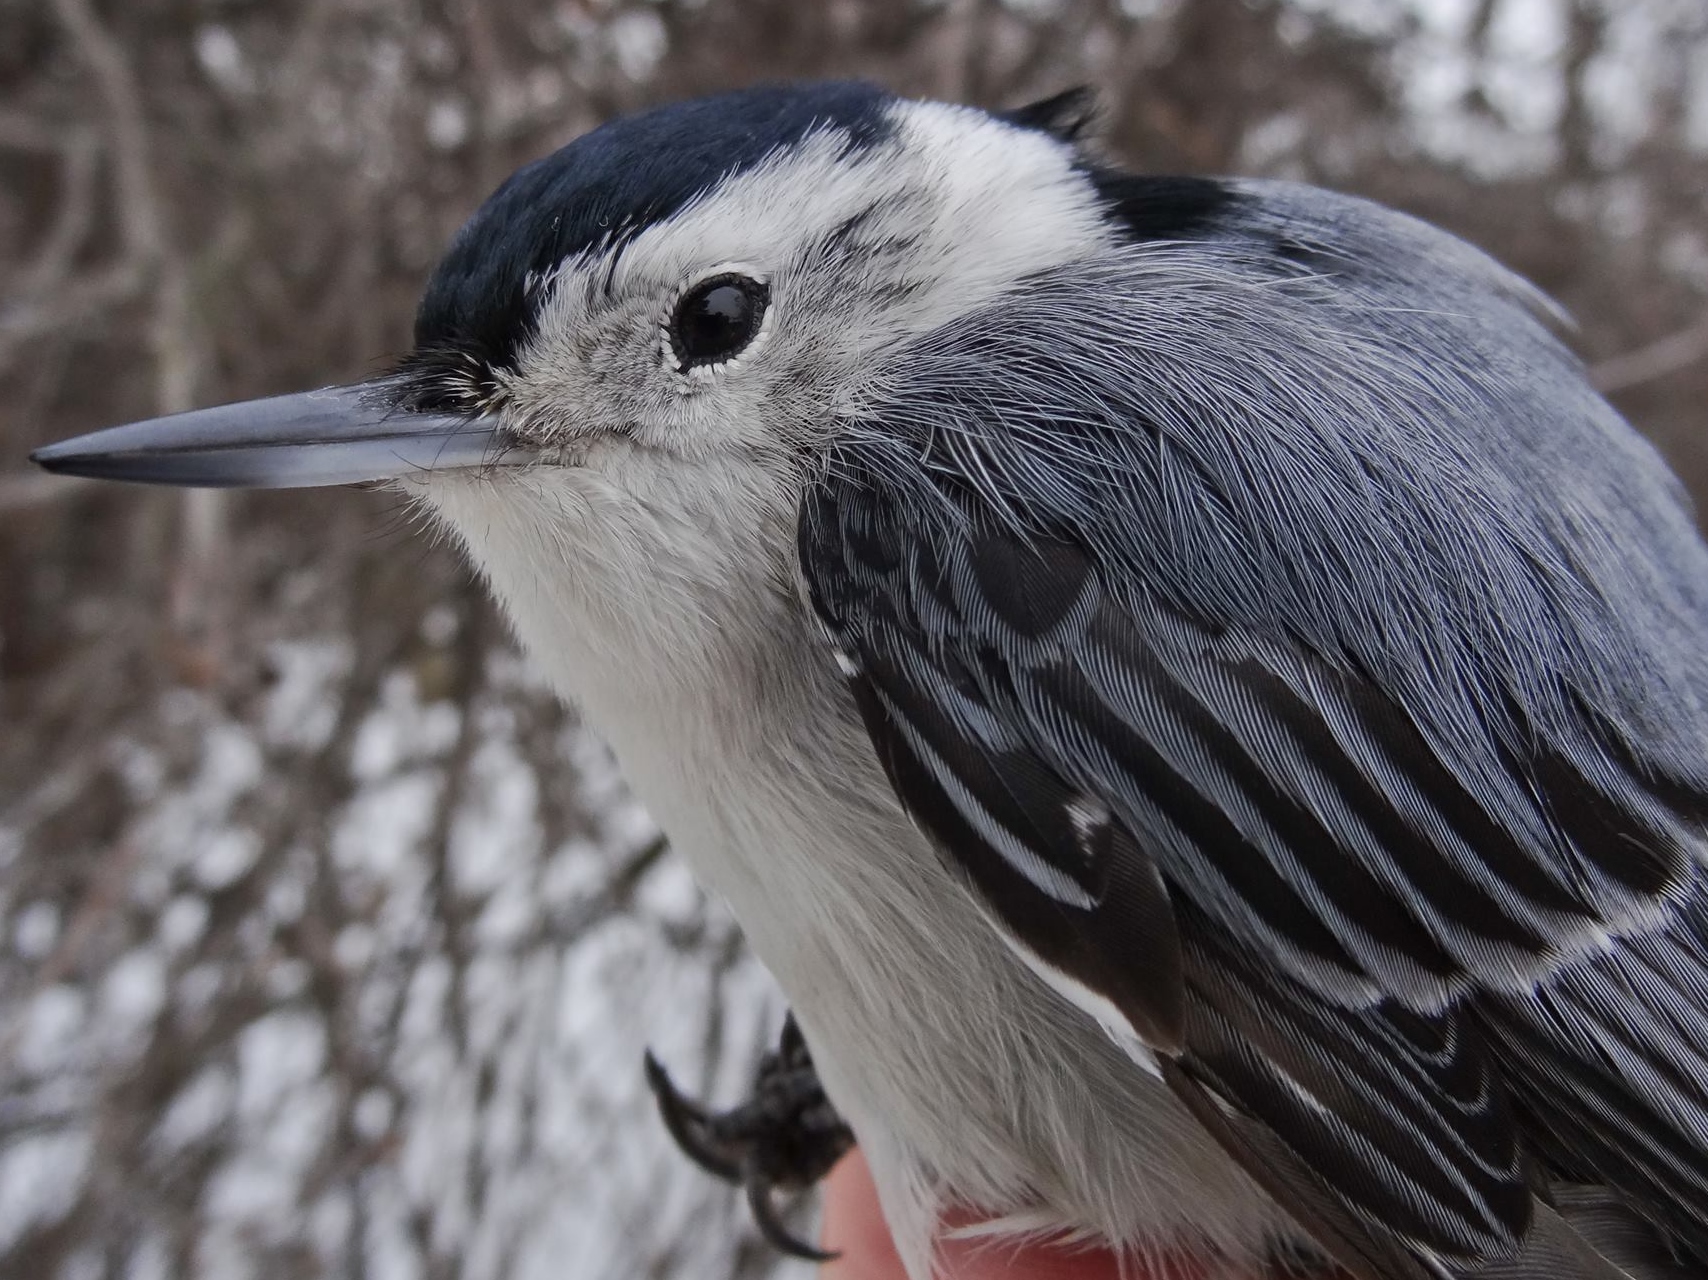 White-breasted Nuthatches are year-round residents at MBO, but are an uncommon capture and pleasant surprise in any season (Photo by Nicolas Bernier)